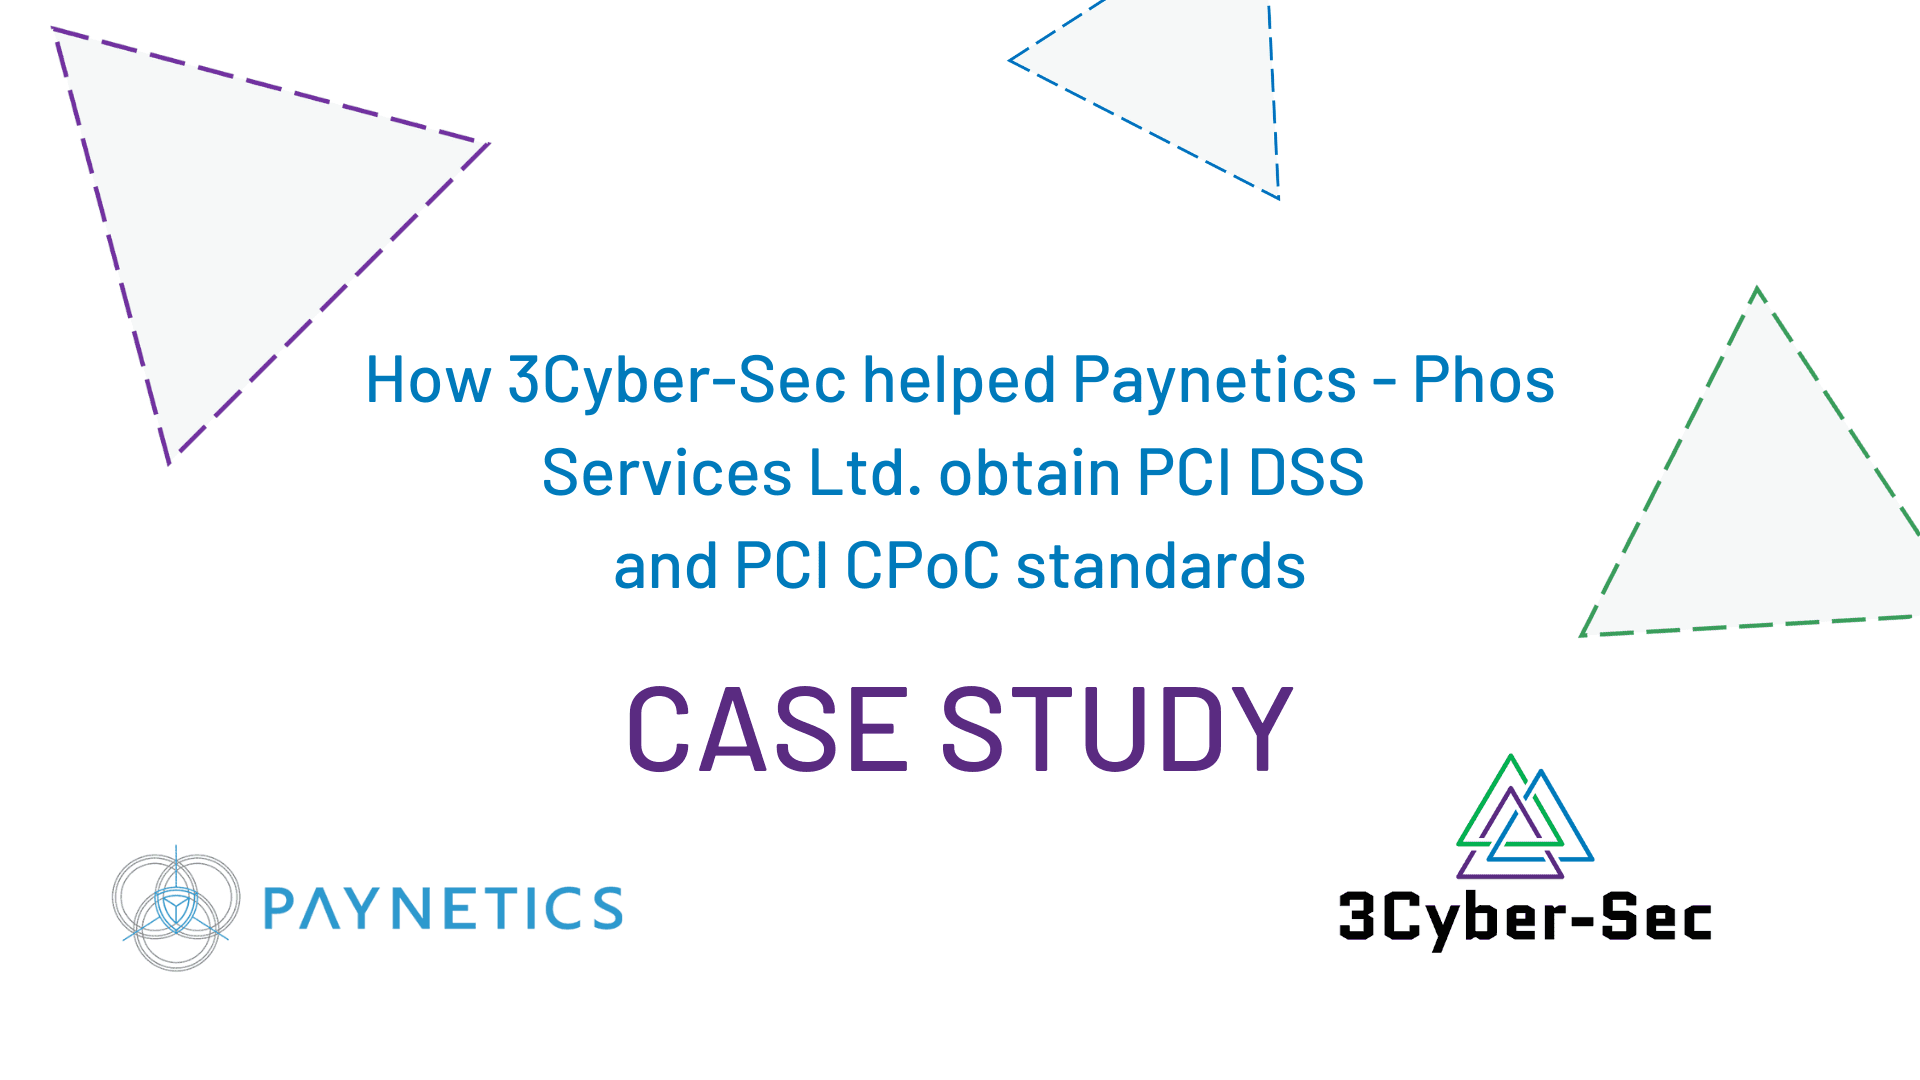 Product Case Study: How 3Cyber-Sec helped Paynetics – Phos Services Ltd. obtain PCI DSS and PCI CPoC standards? - 3Cyber-Sec image